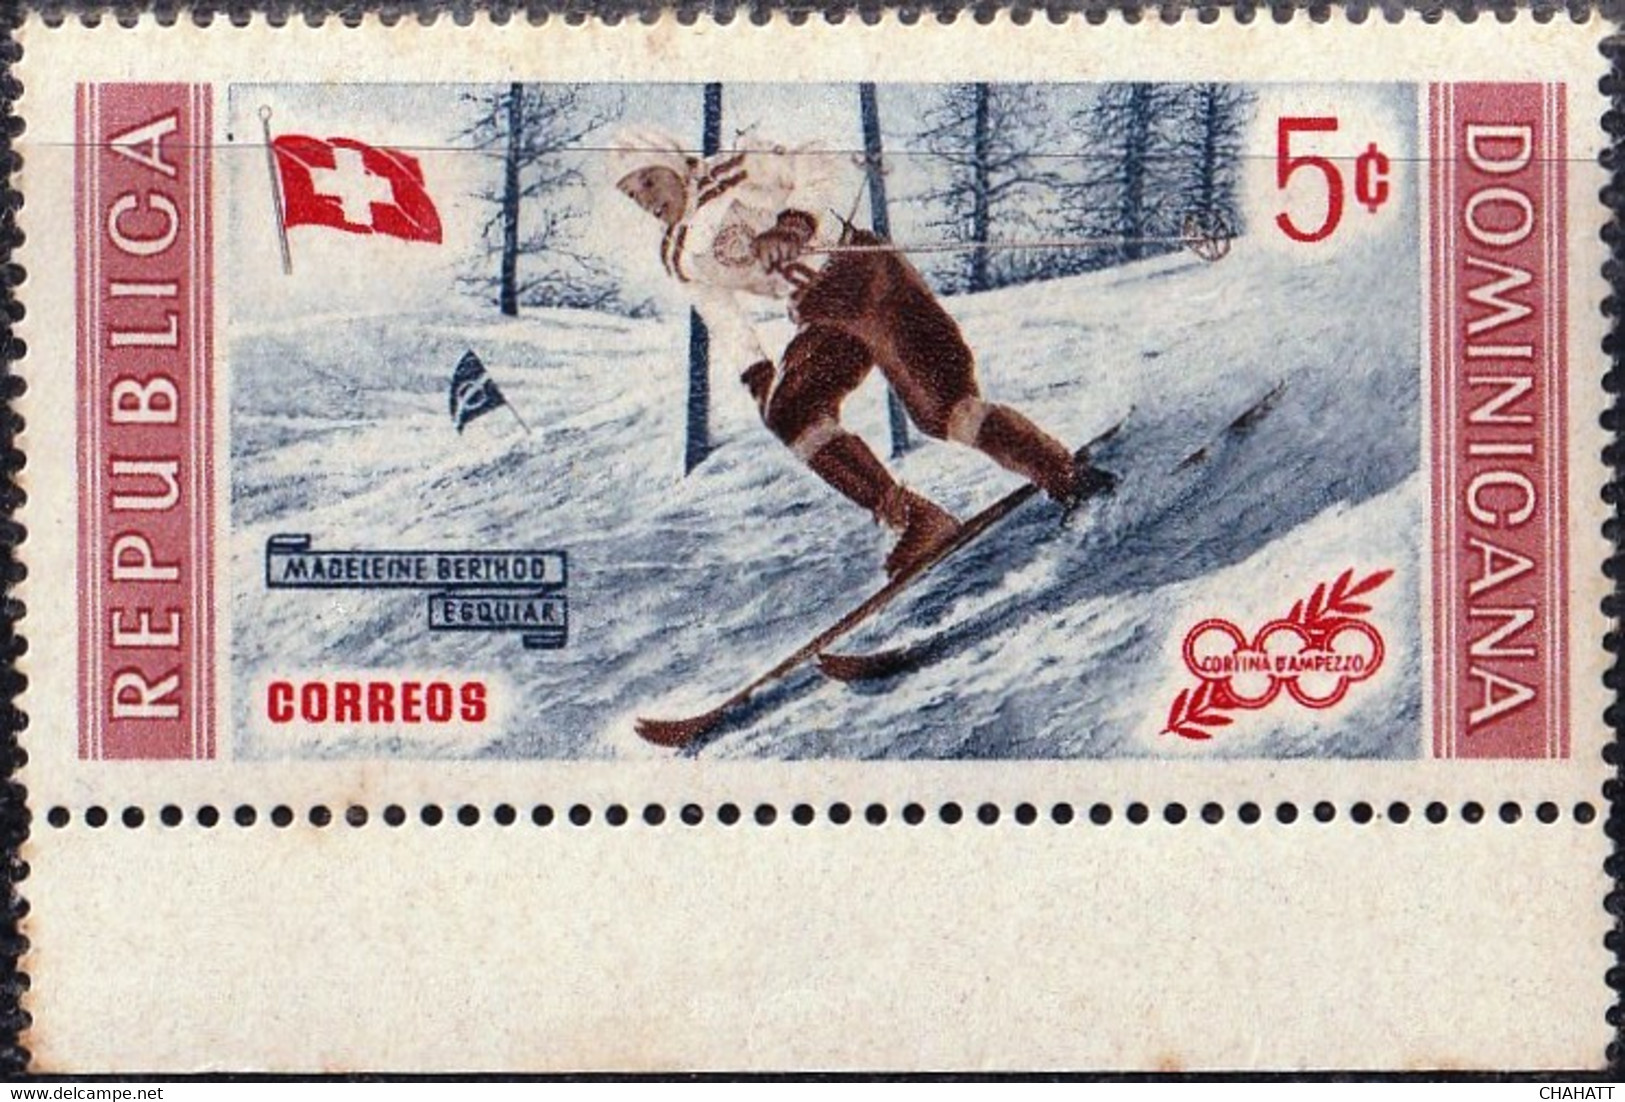 WINTER OLYMPICS-1956-SKIING-PERF & IMPERF-DOMINICANA-MNH-A4-535 - Winter 1956: Cortina D'Ampezzo